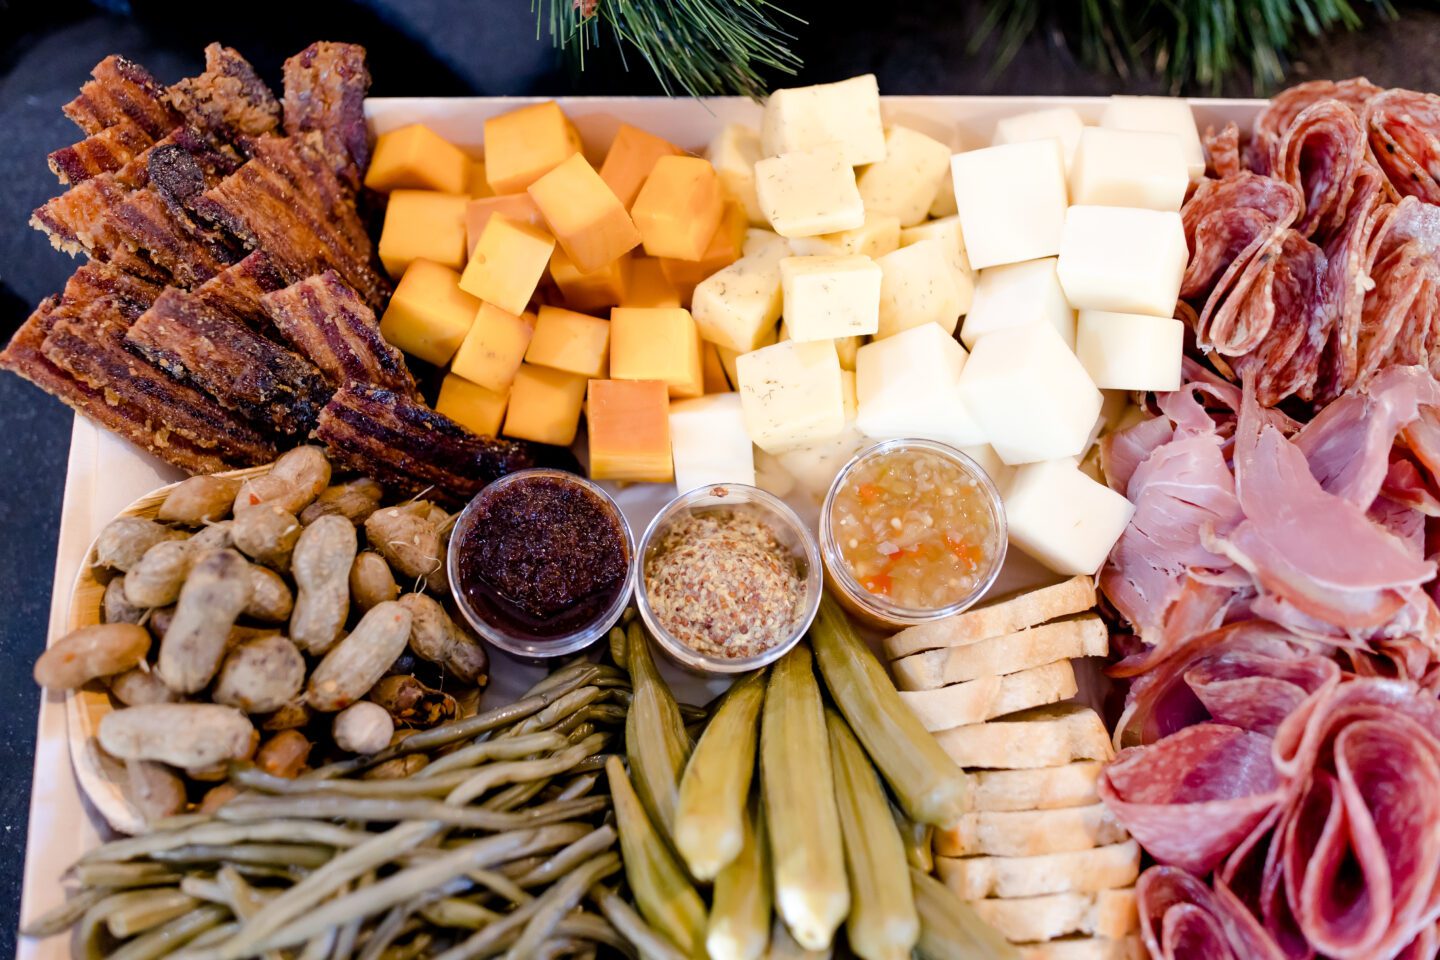 Country Cooking: How to Prepare a Charcuterie Board with Southern Meats and Sides